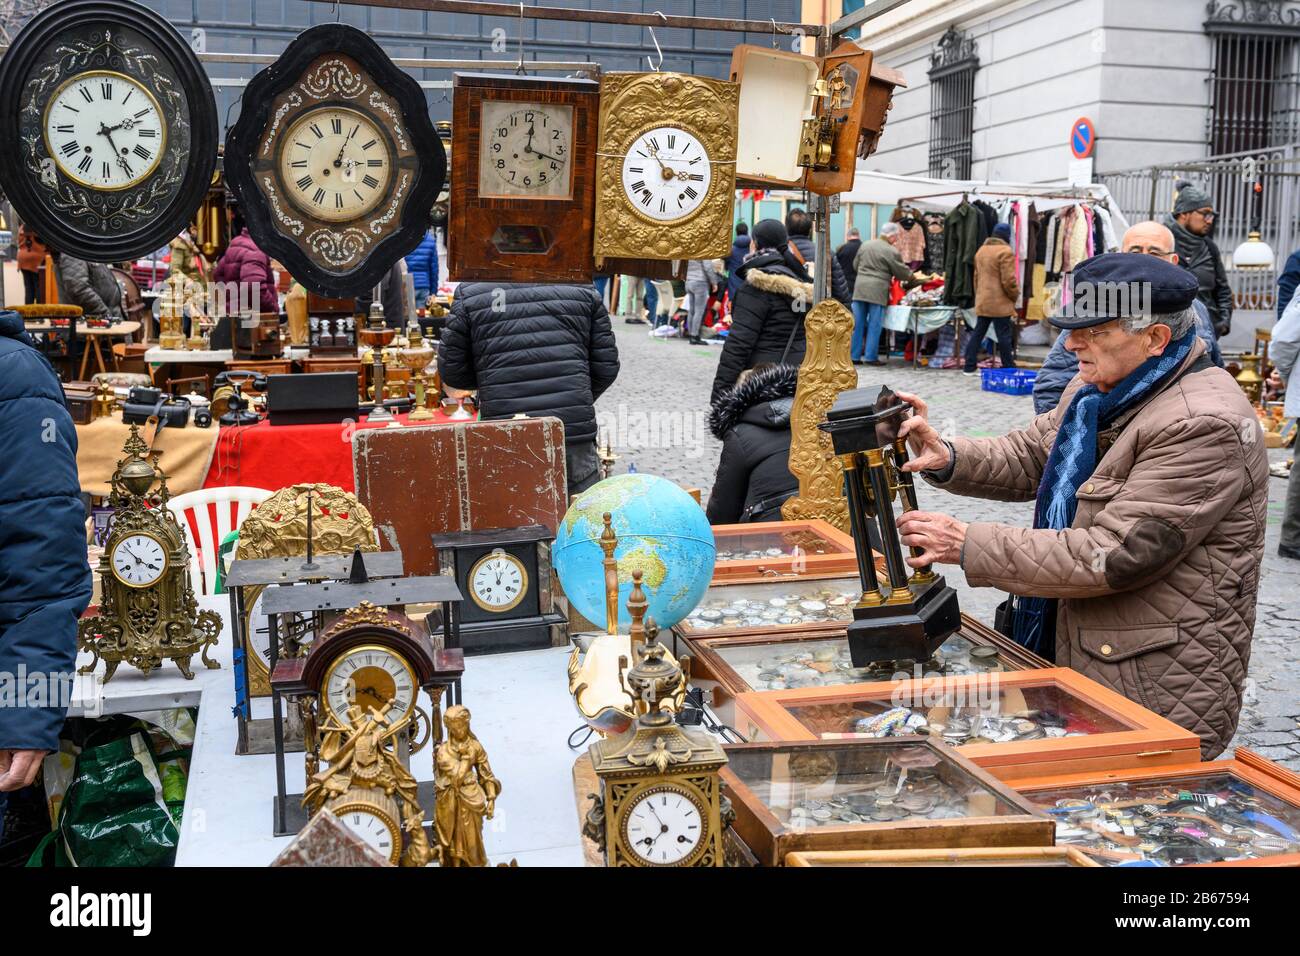 Clocks and other antiques on sale in the Rastro flea market around the Plaza de Cascorro between La Latina and Embajadores,  Madrid, Spain. Stock Photo